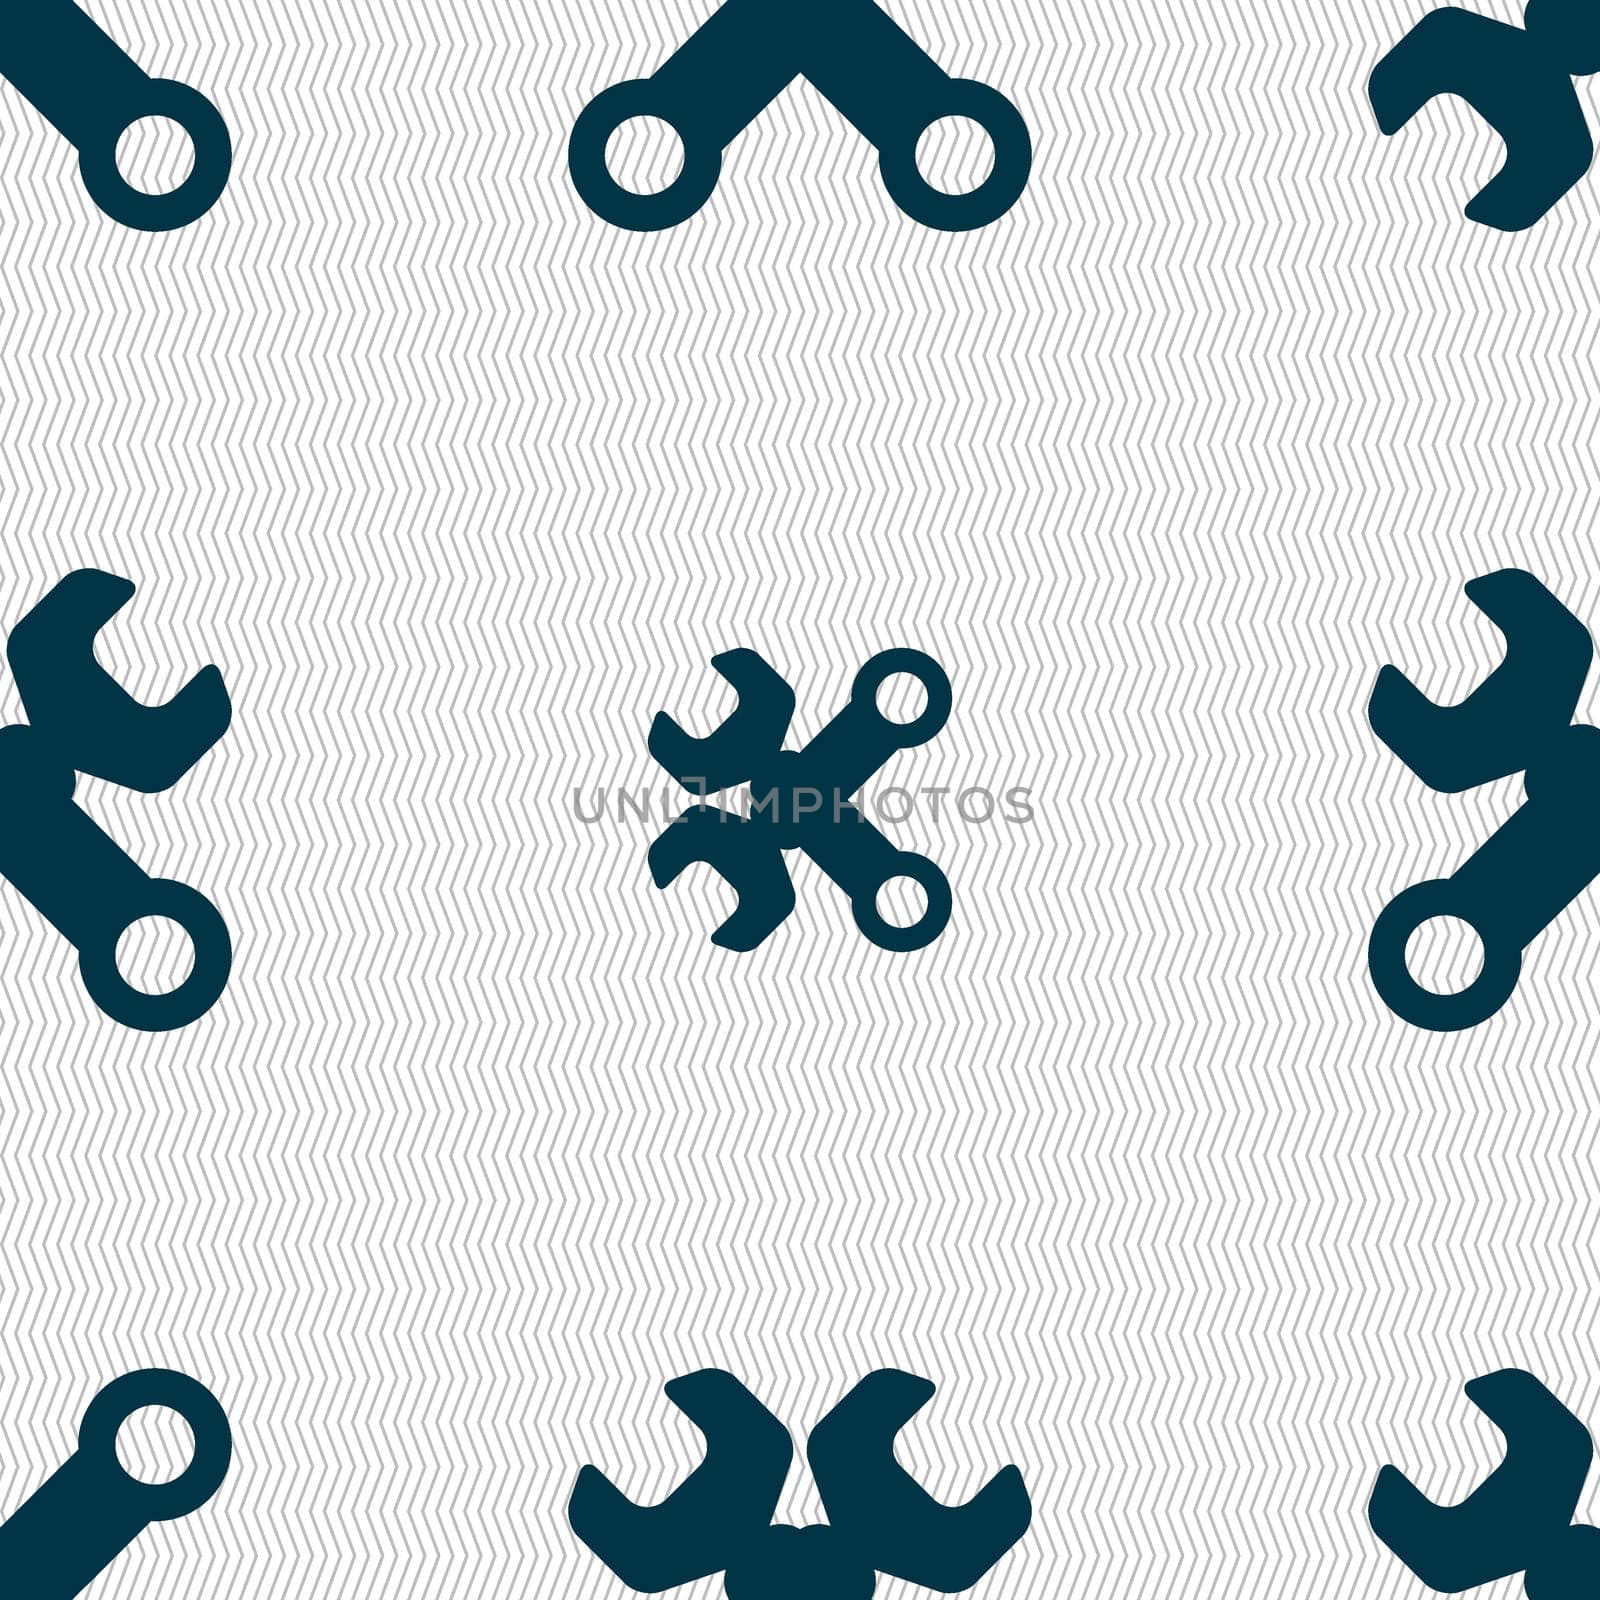 Wrench key sign icon. Service tool symbol. Seamless abstract background with geometric shapes. illustration